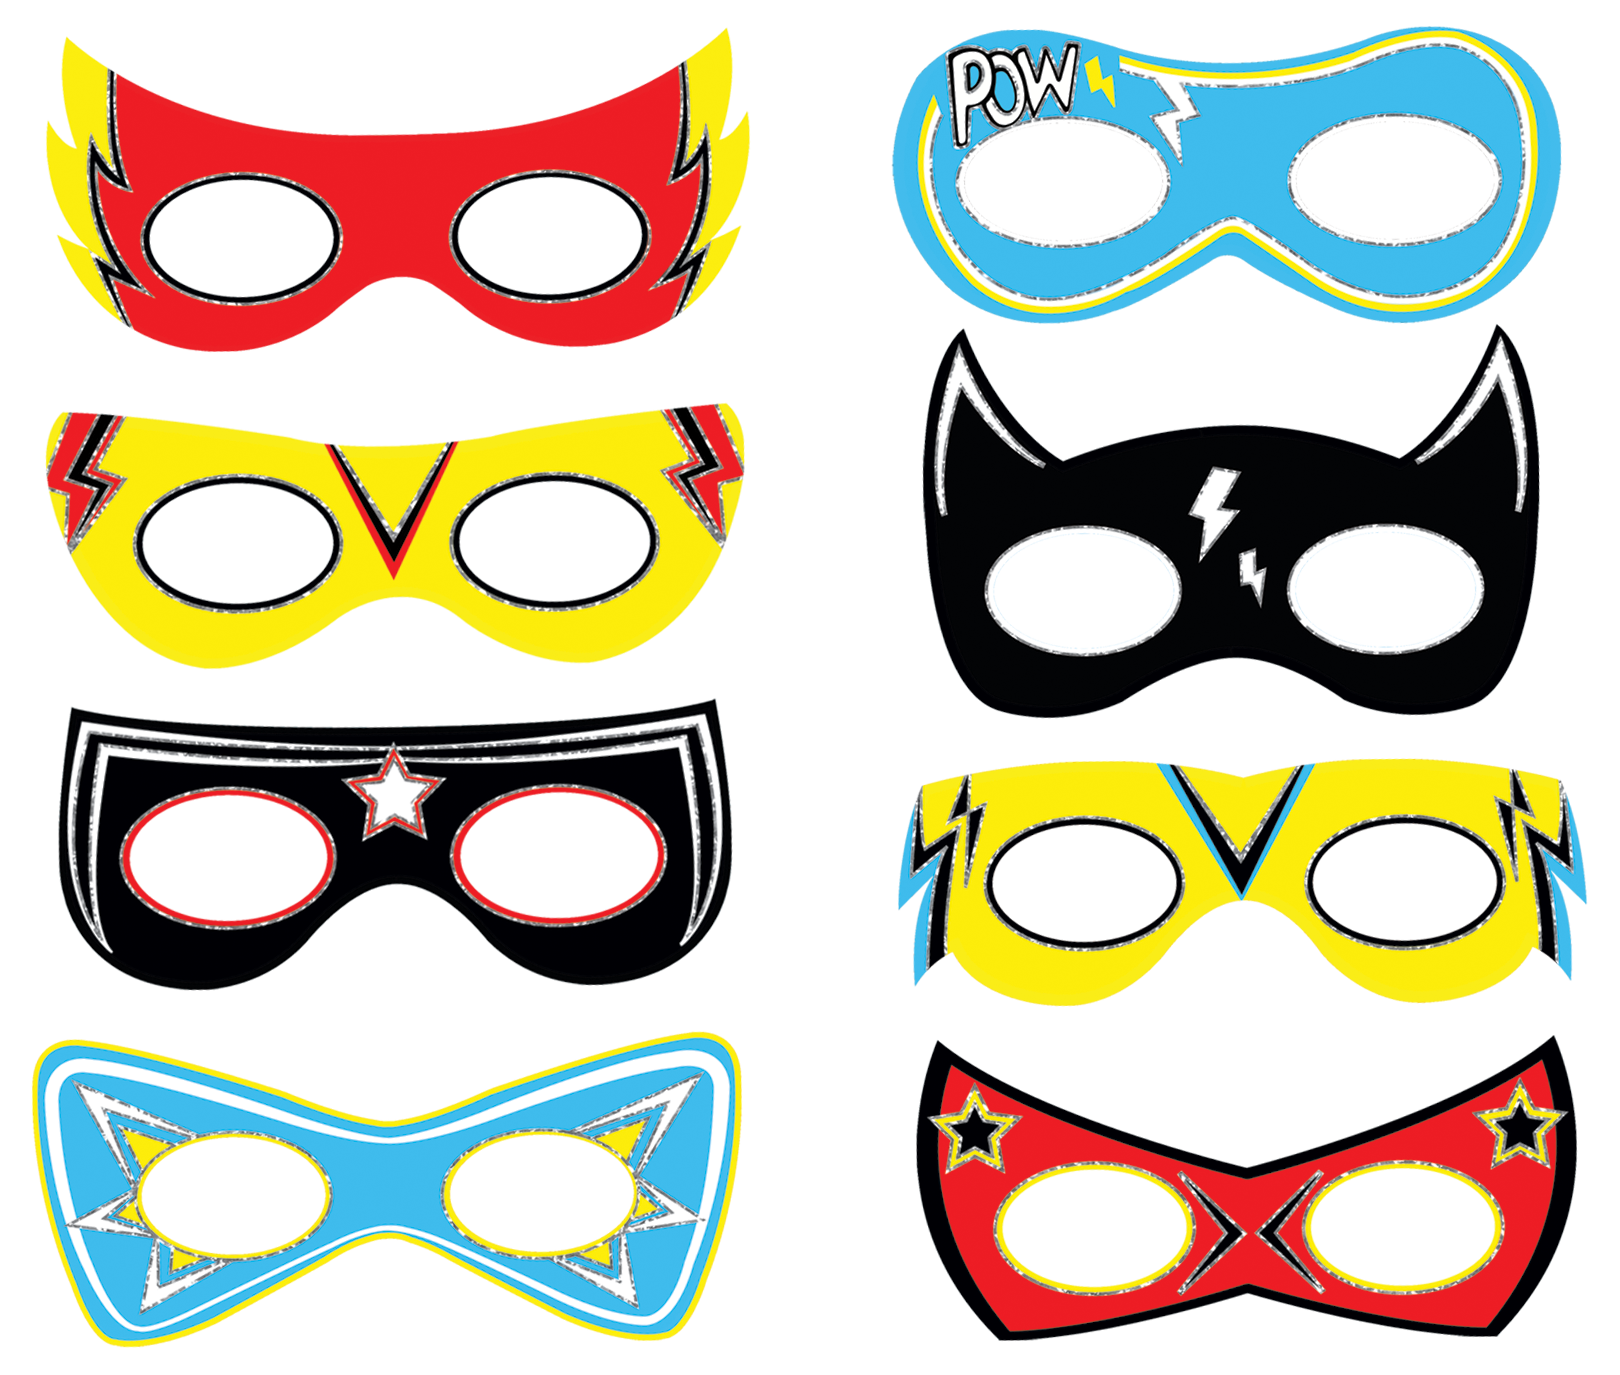 Super Hero Masks Party Partners - Cardmore